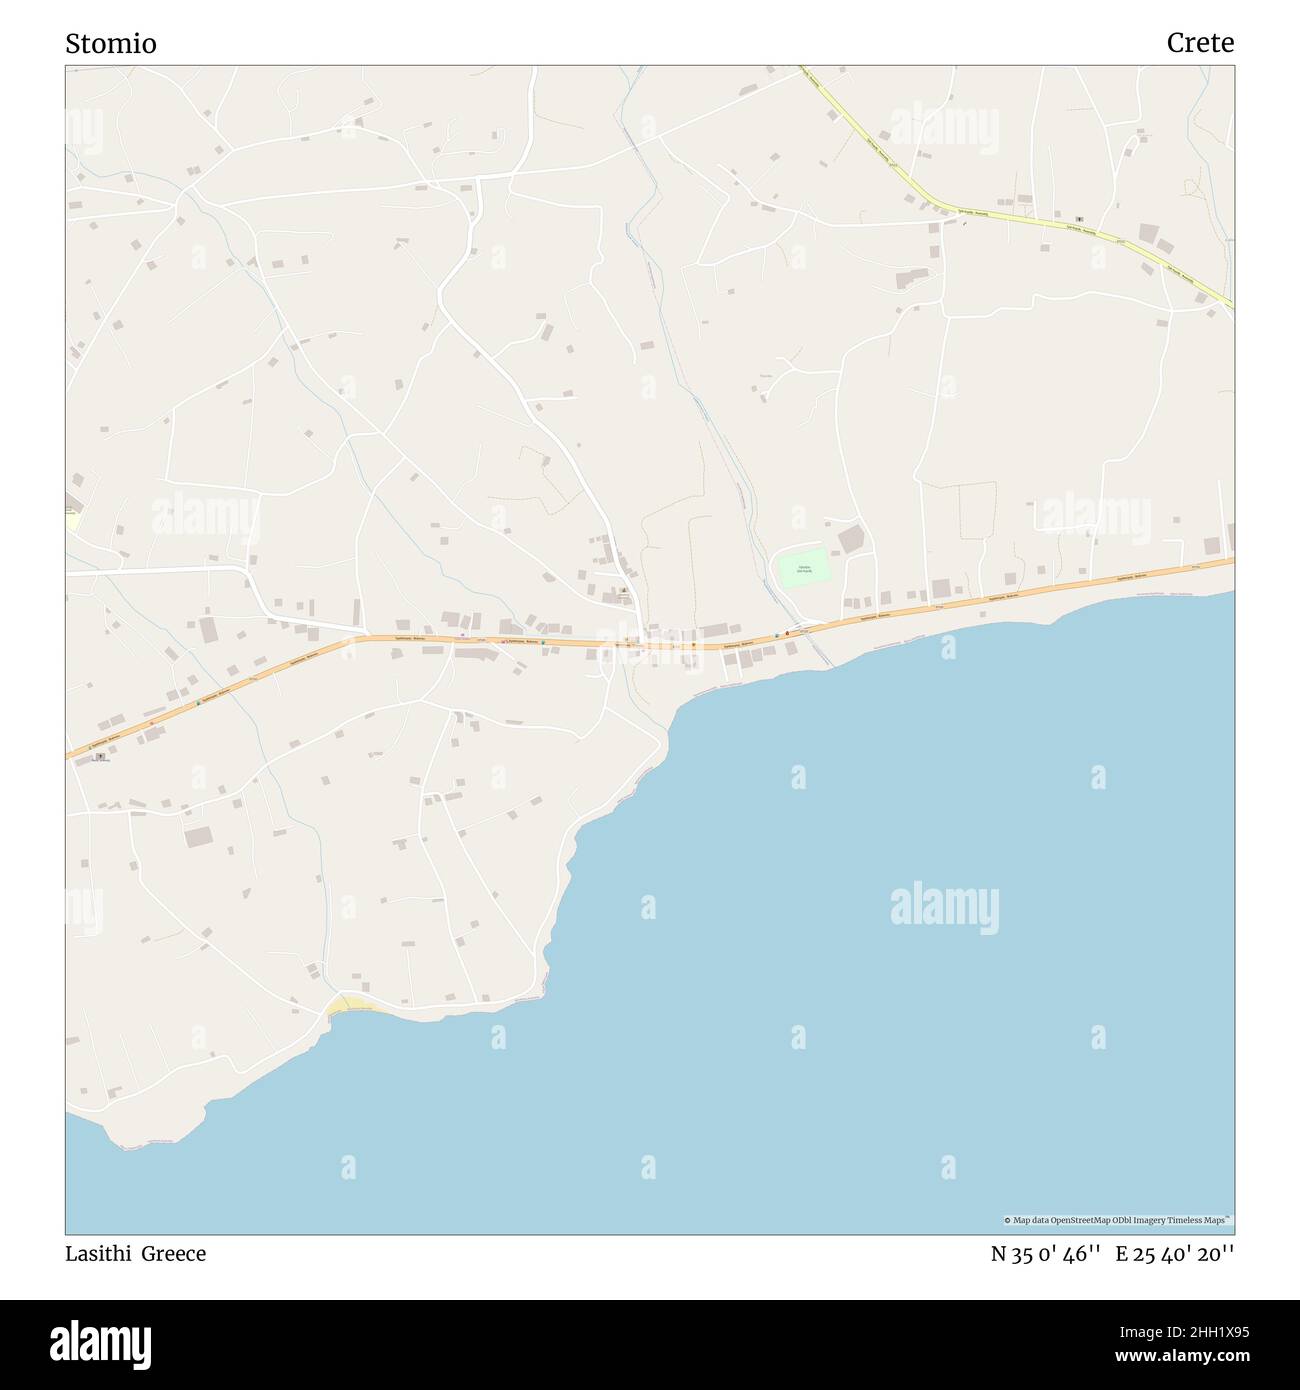 Stomio, Lasithi, Greece, Crete, N 35 0' 46'', E 25 40' 20'', map, Timeless Map published in 2021. Travelers, explorers and adventurers like Florence Nightingale, David Livingstone, Ernest Shackleton, Lewis and Clark and Sherlock Holmes relied on maps to plan travels to the world's most remote corners, Timeless Maps is mapping most locations on the globe, showing the achievement of great dreams Stock Photo